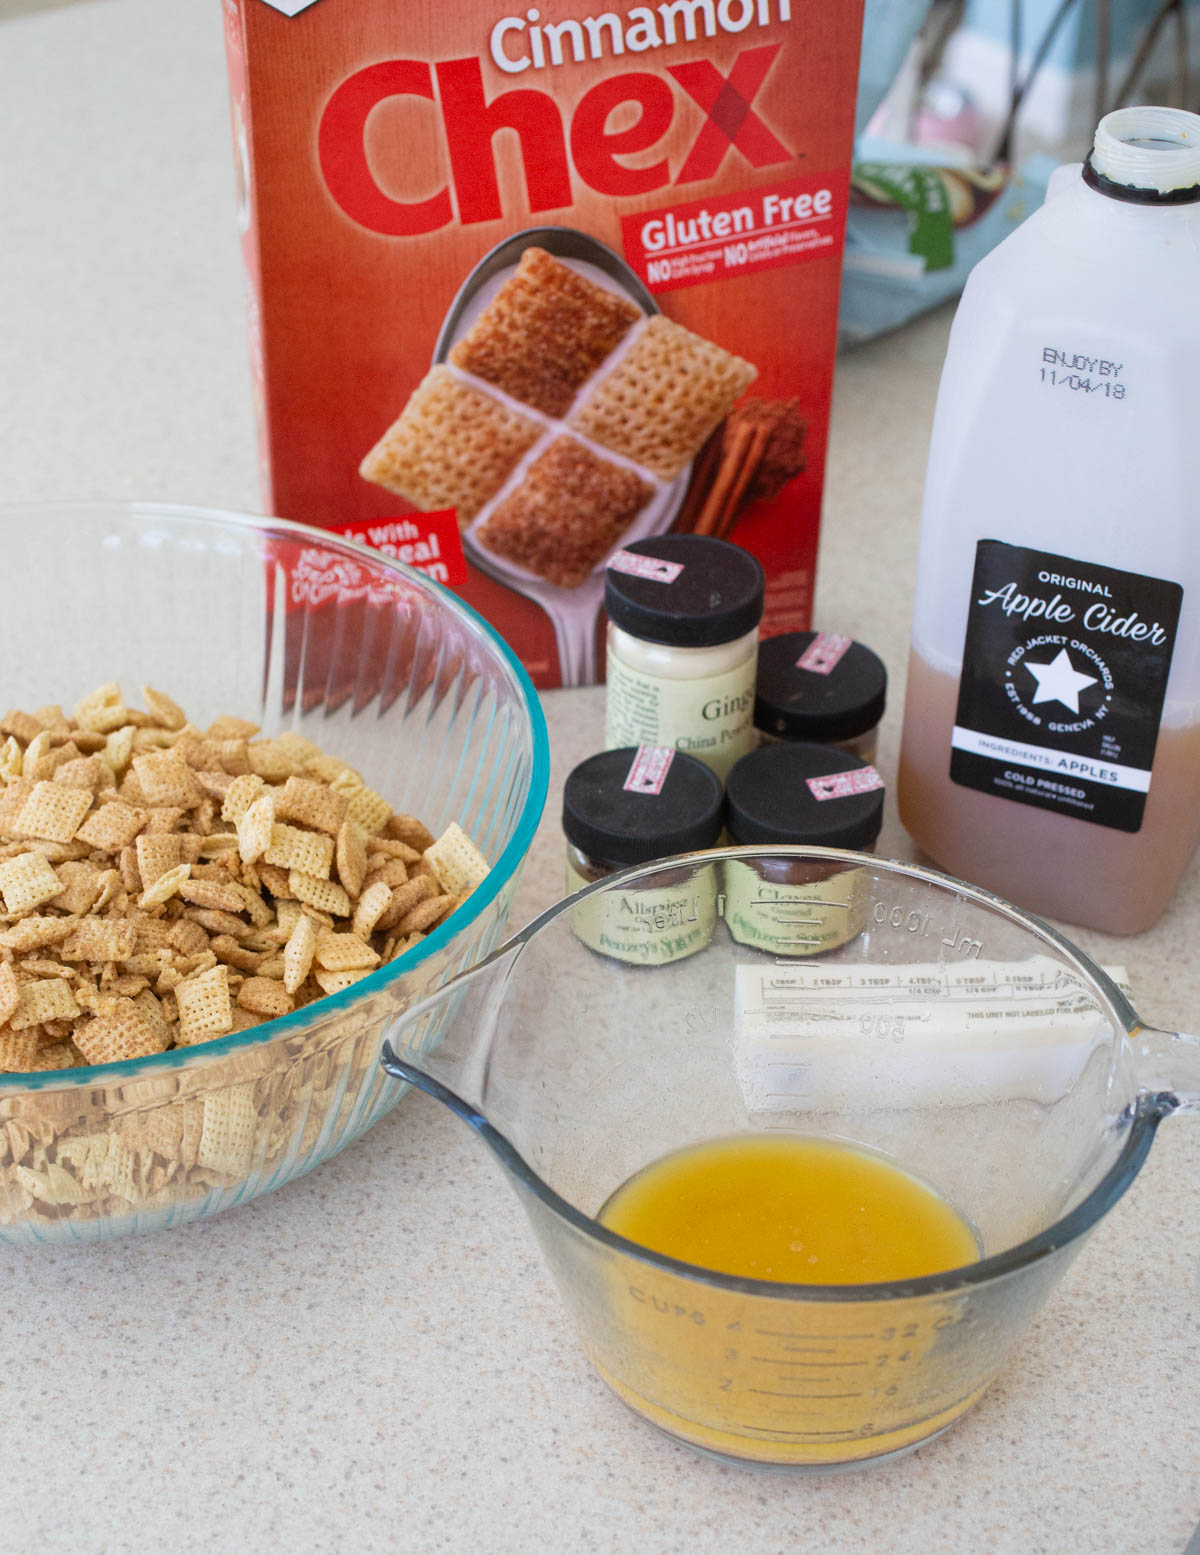 The ingredients to make apple cinnamon chex mix are on the counter.